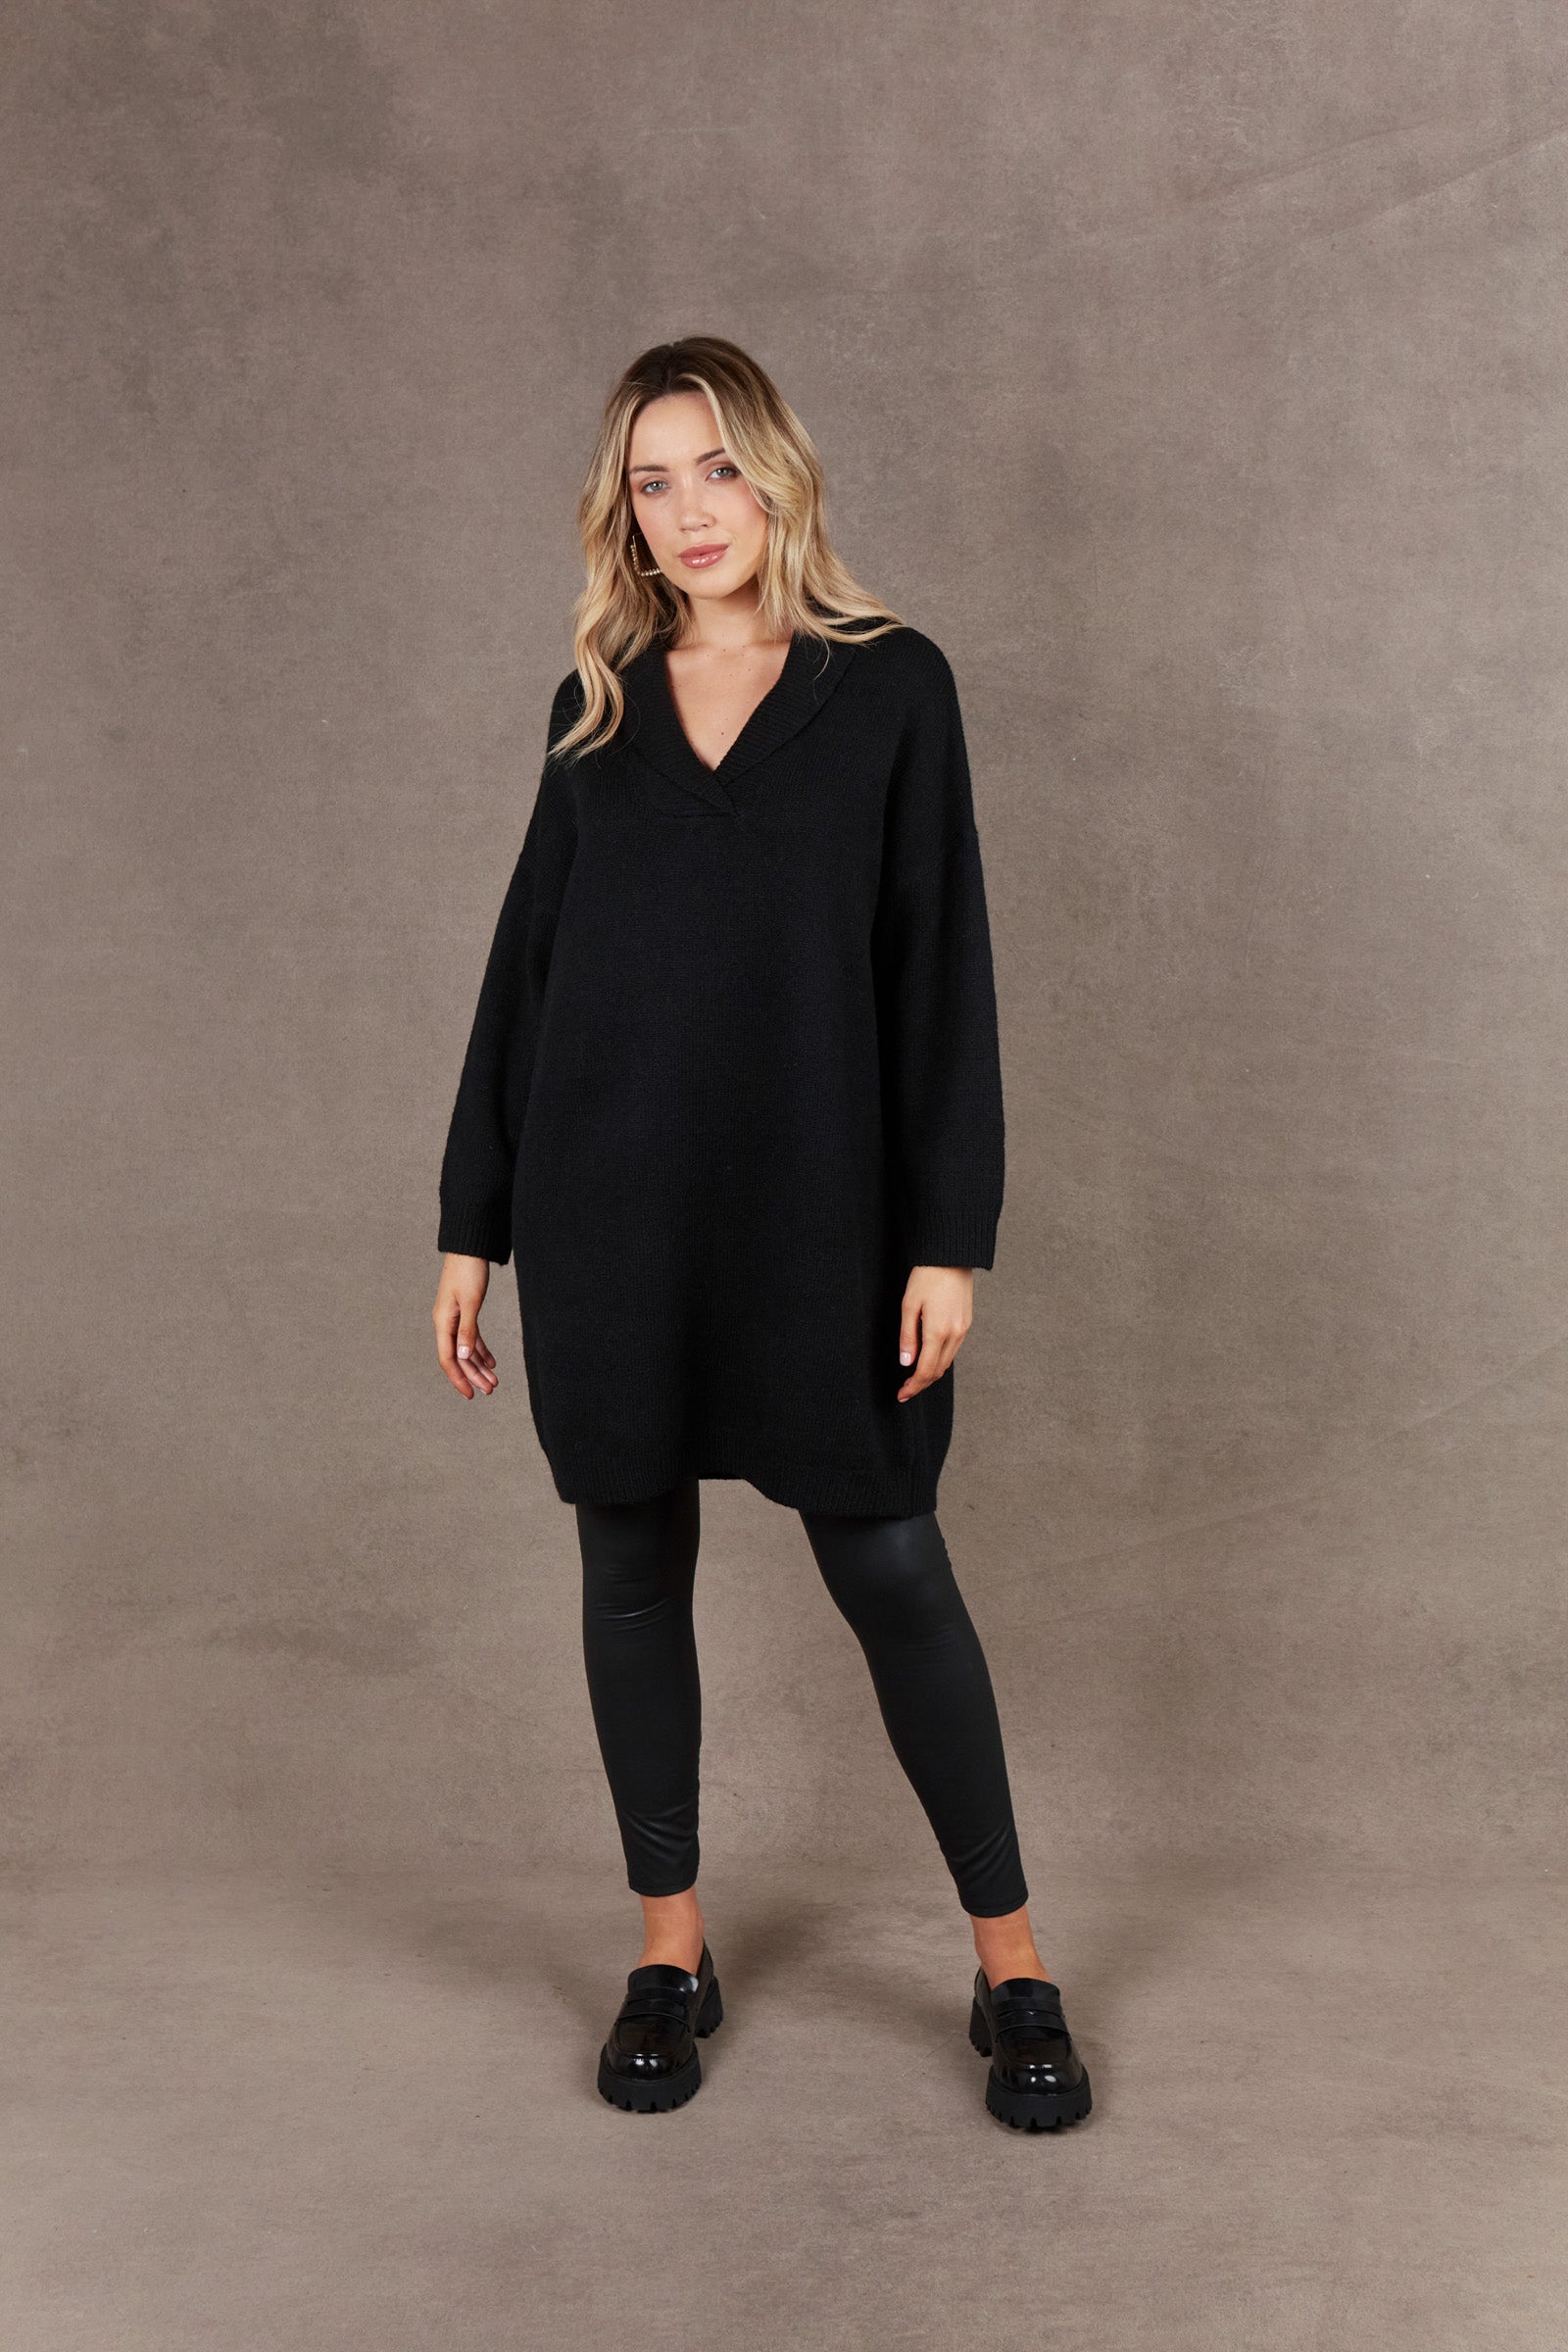 Paarl Top/Dress - Ebony - eb&ive Clothing - Knit Jumper One Size